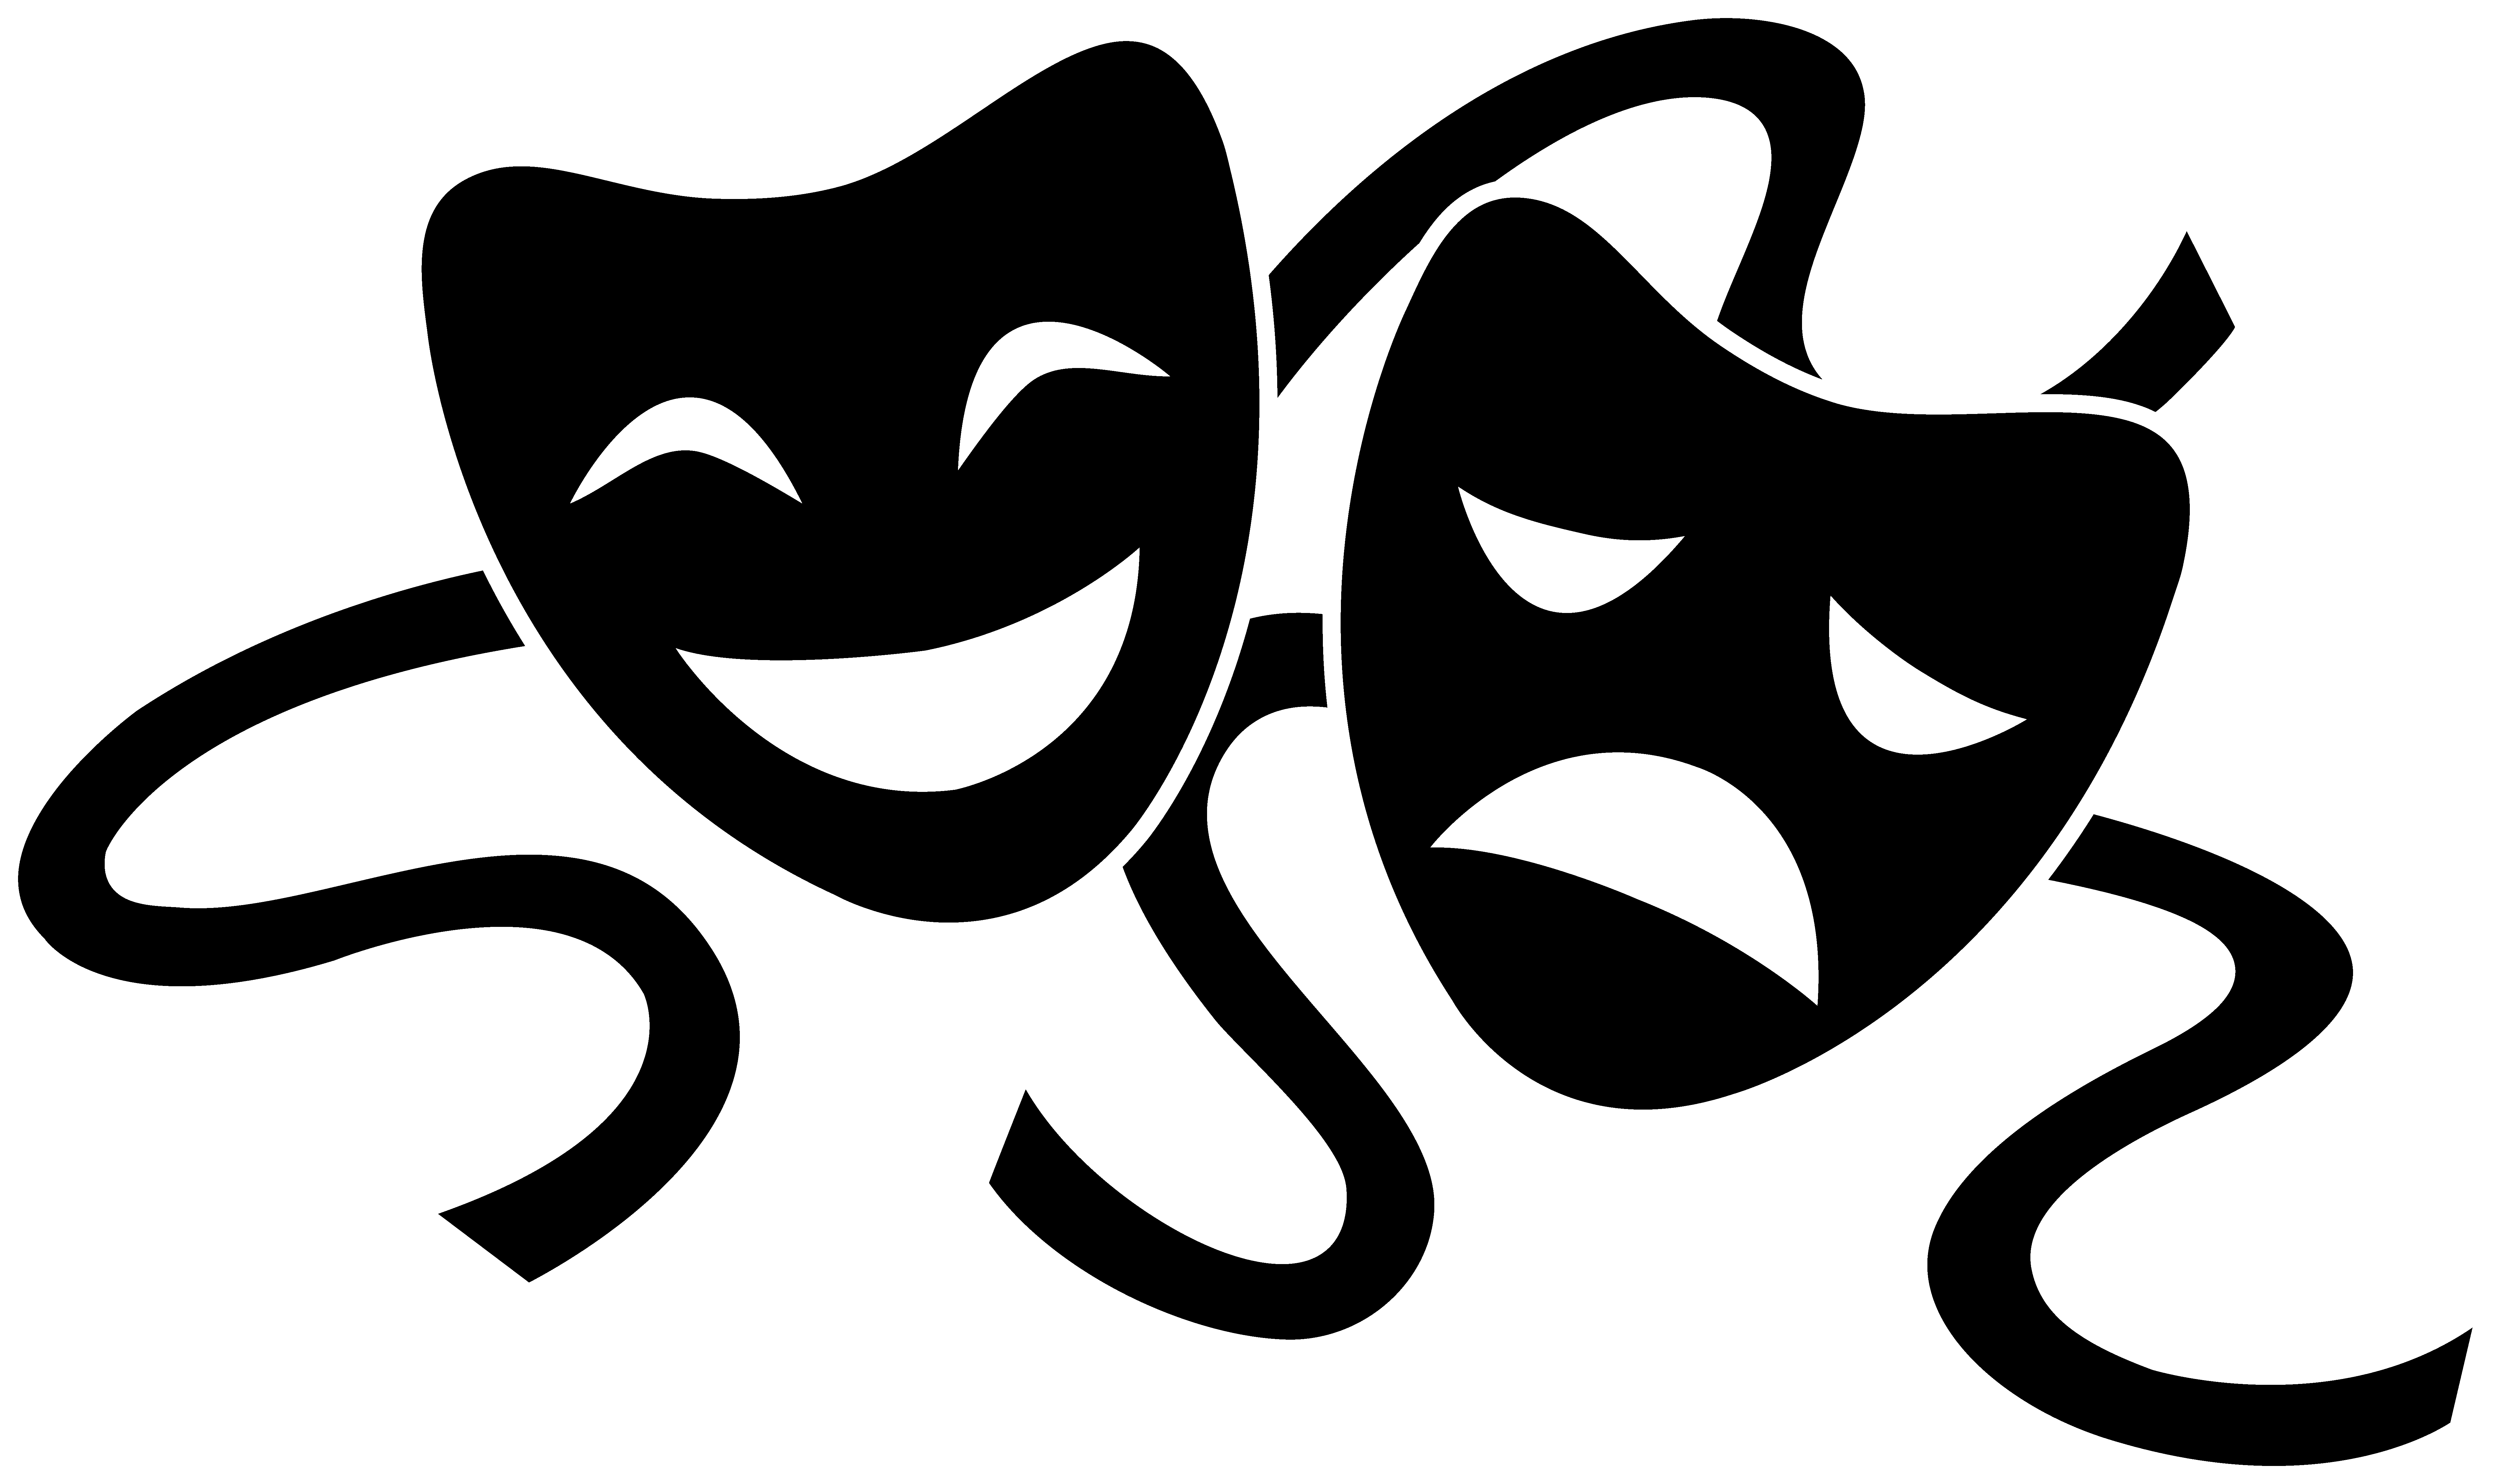 Theater clipart free clipart 